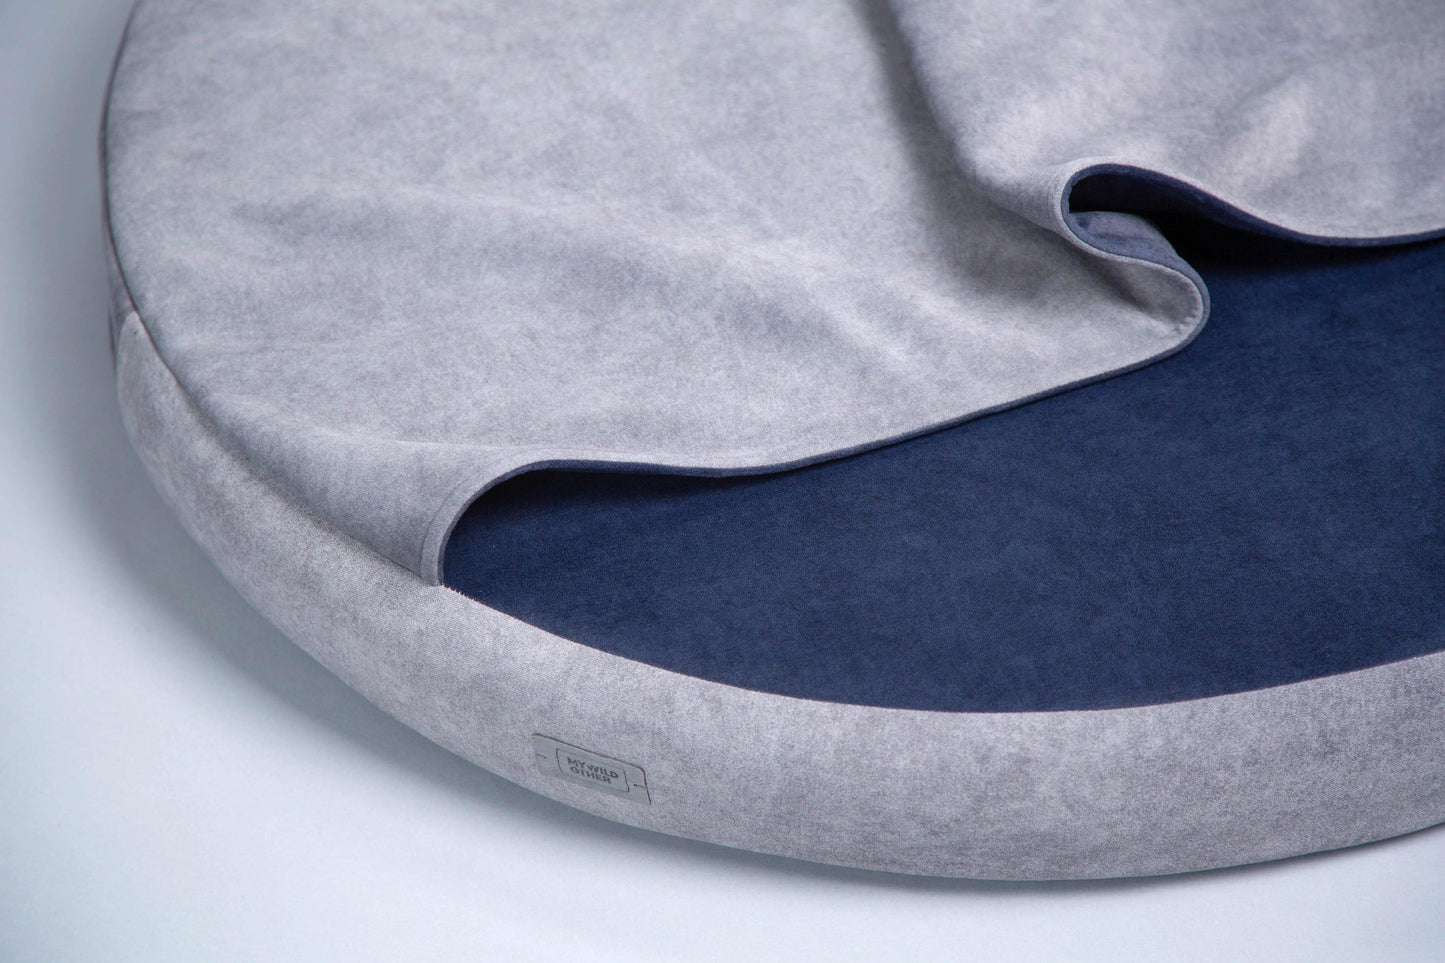 Cozy cave dog bed. STEEL GREY+NAVY BLUE - European handmade dog accessories by My Wild Other